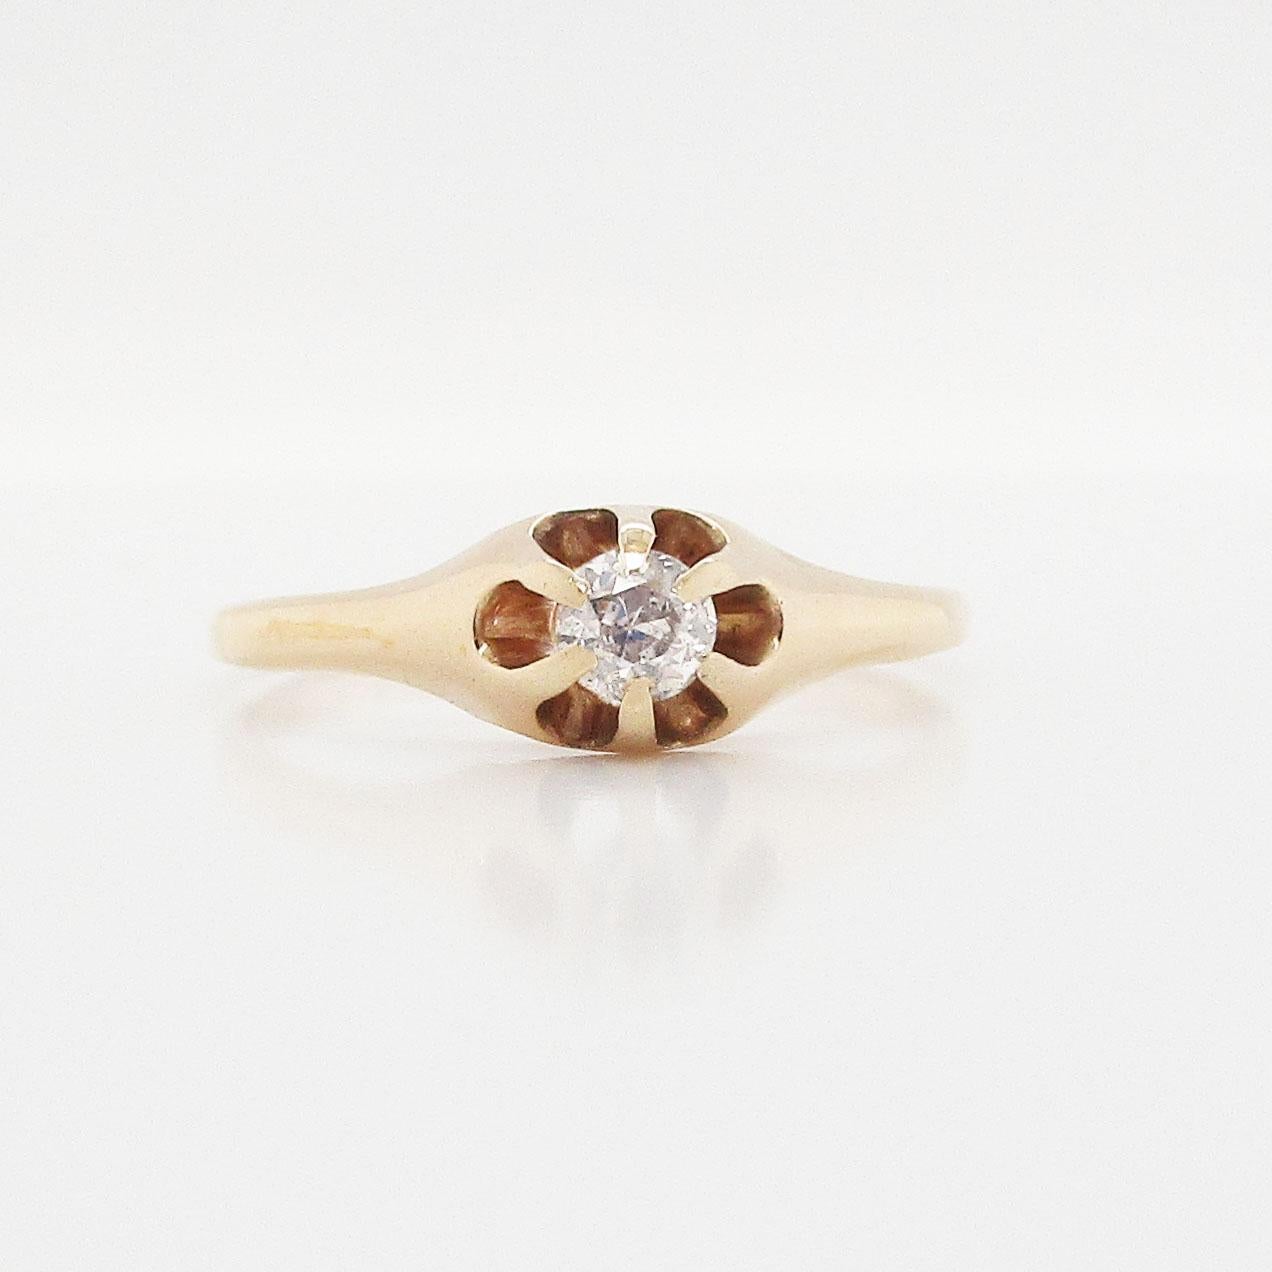 Women's 1890 Victorian 14K Rose Gold Old Mine Cut Diamond Ring For Sale